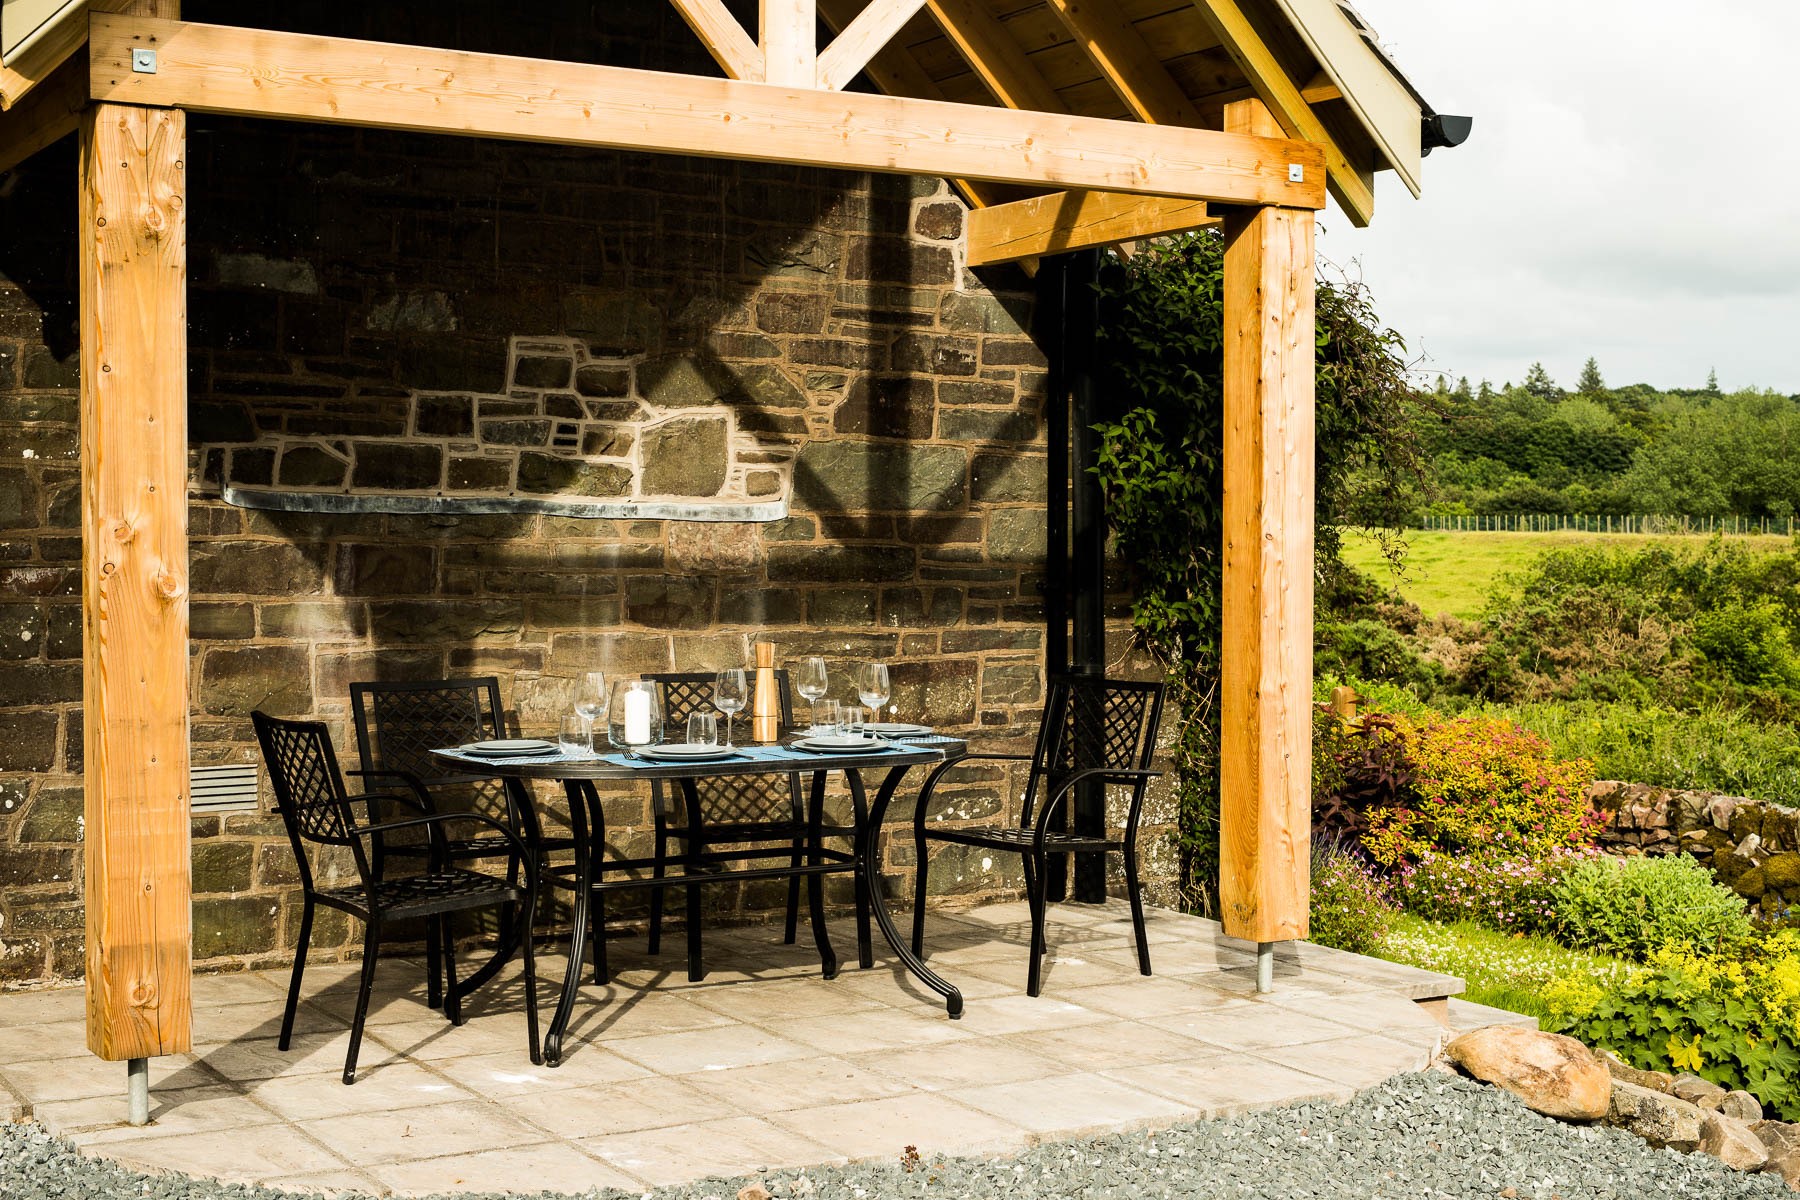 Culdoach Cottage - enjoy alfresco dining on the sheltered patio with views across the estate